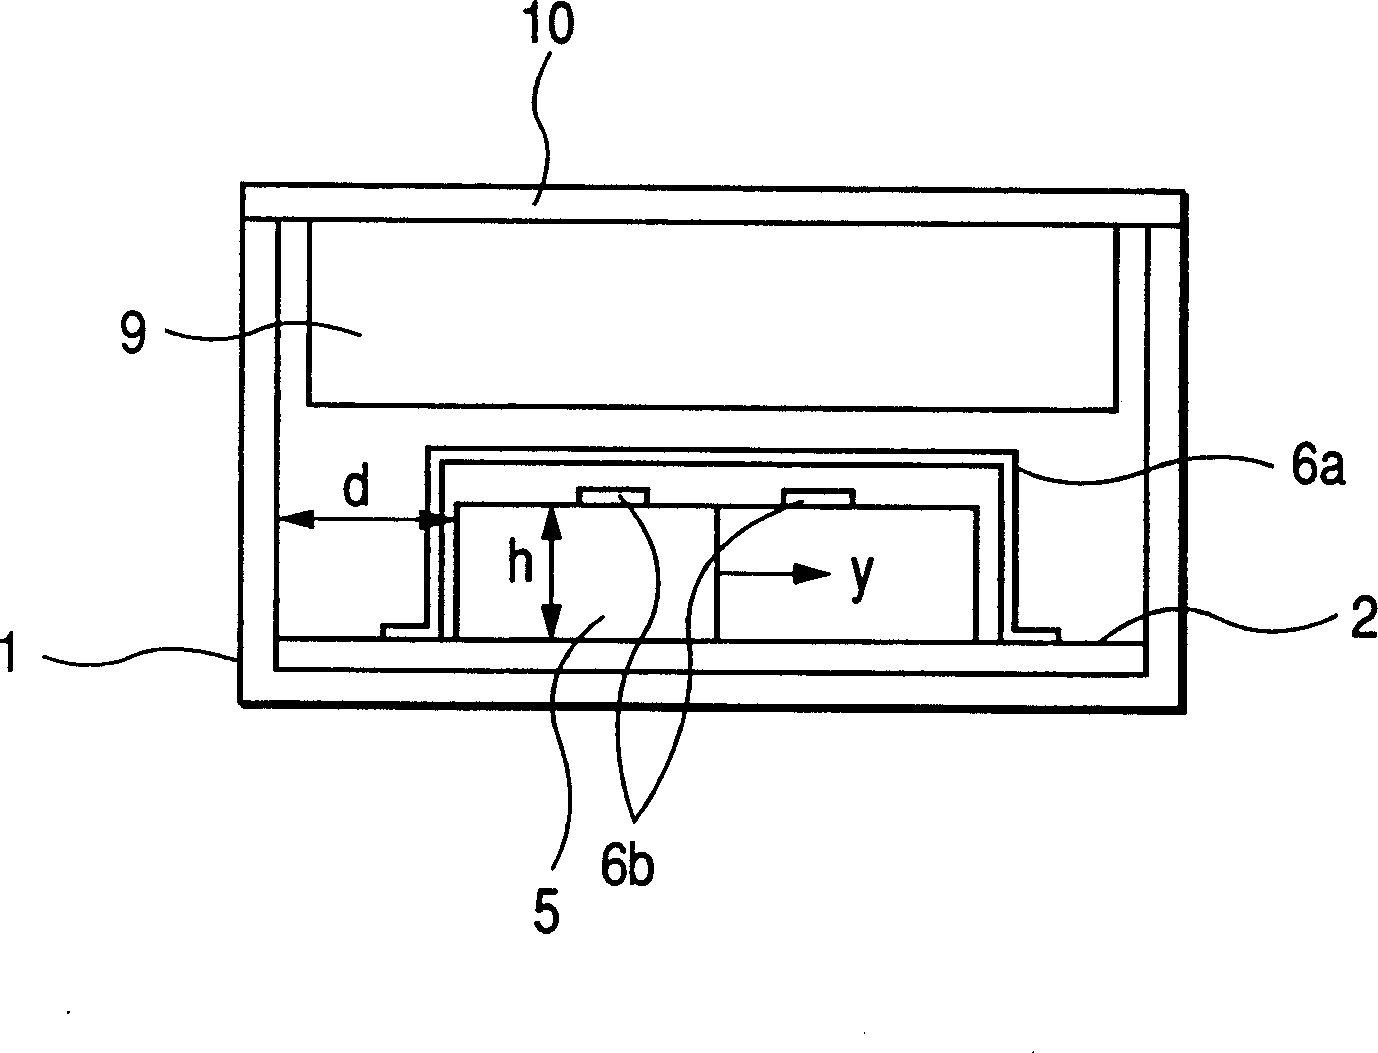 Lumped element non-reciprocal circuit device